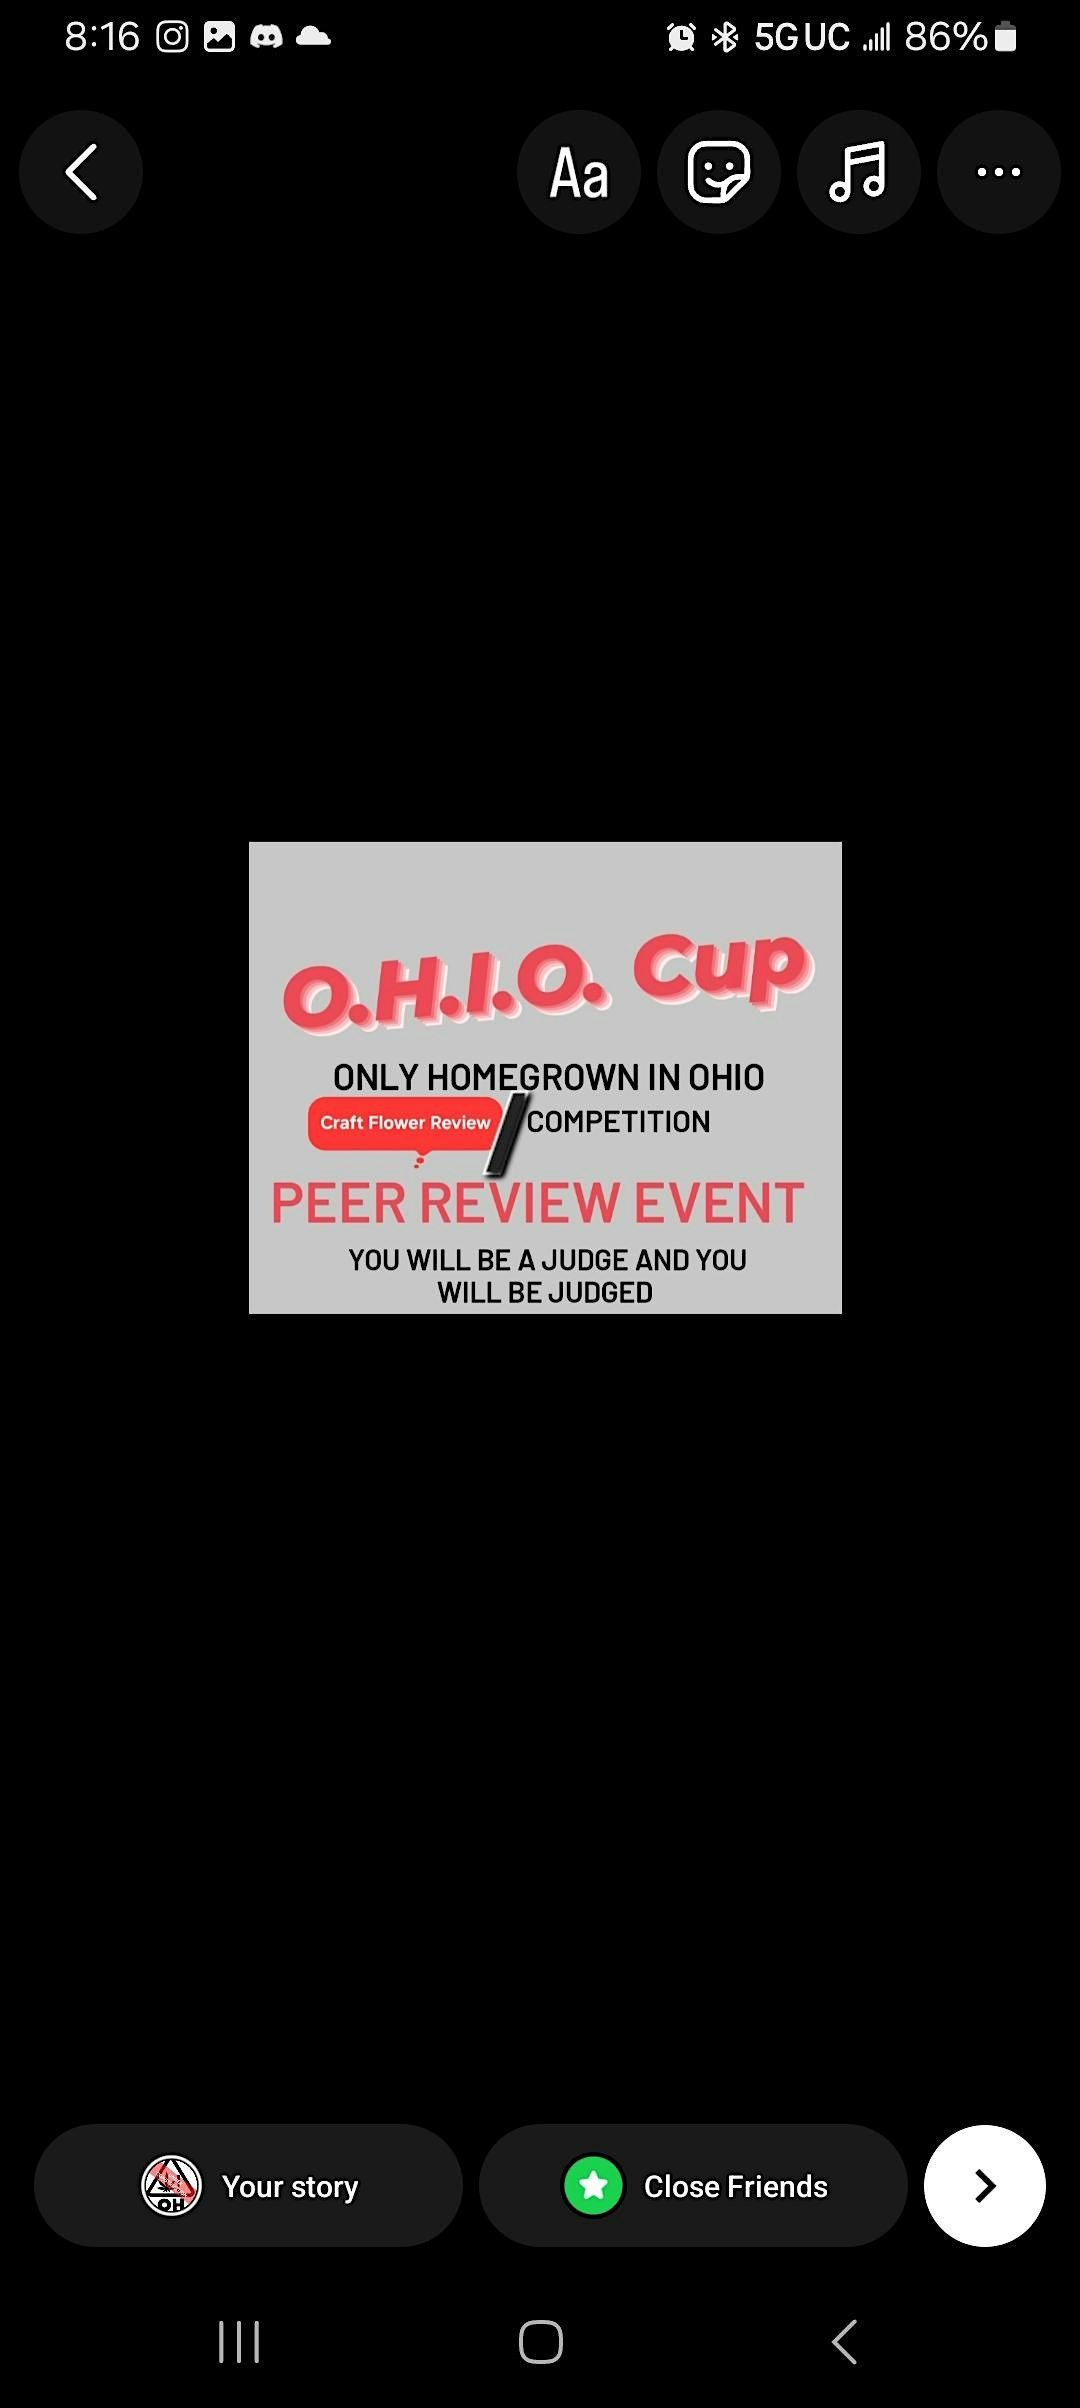 O.H.I.O. CUP      "Personal Cup" 1st 14 of 28